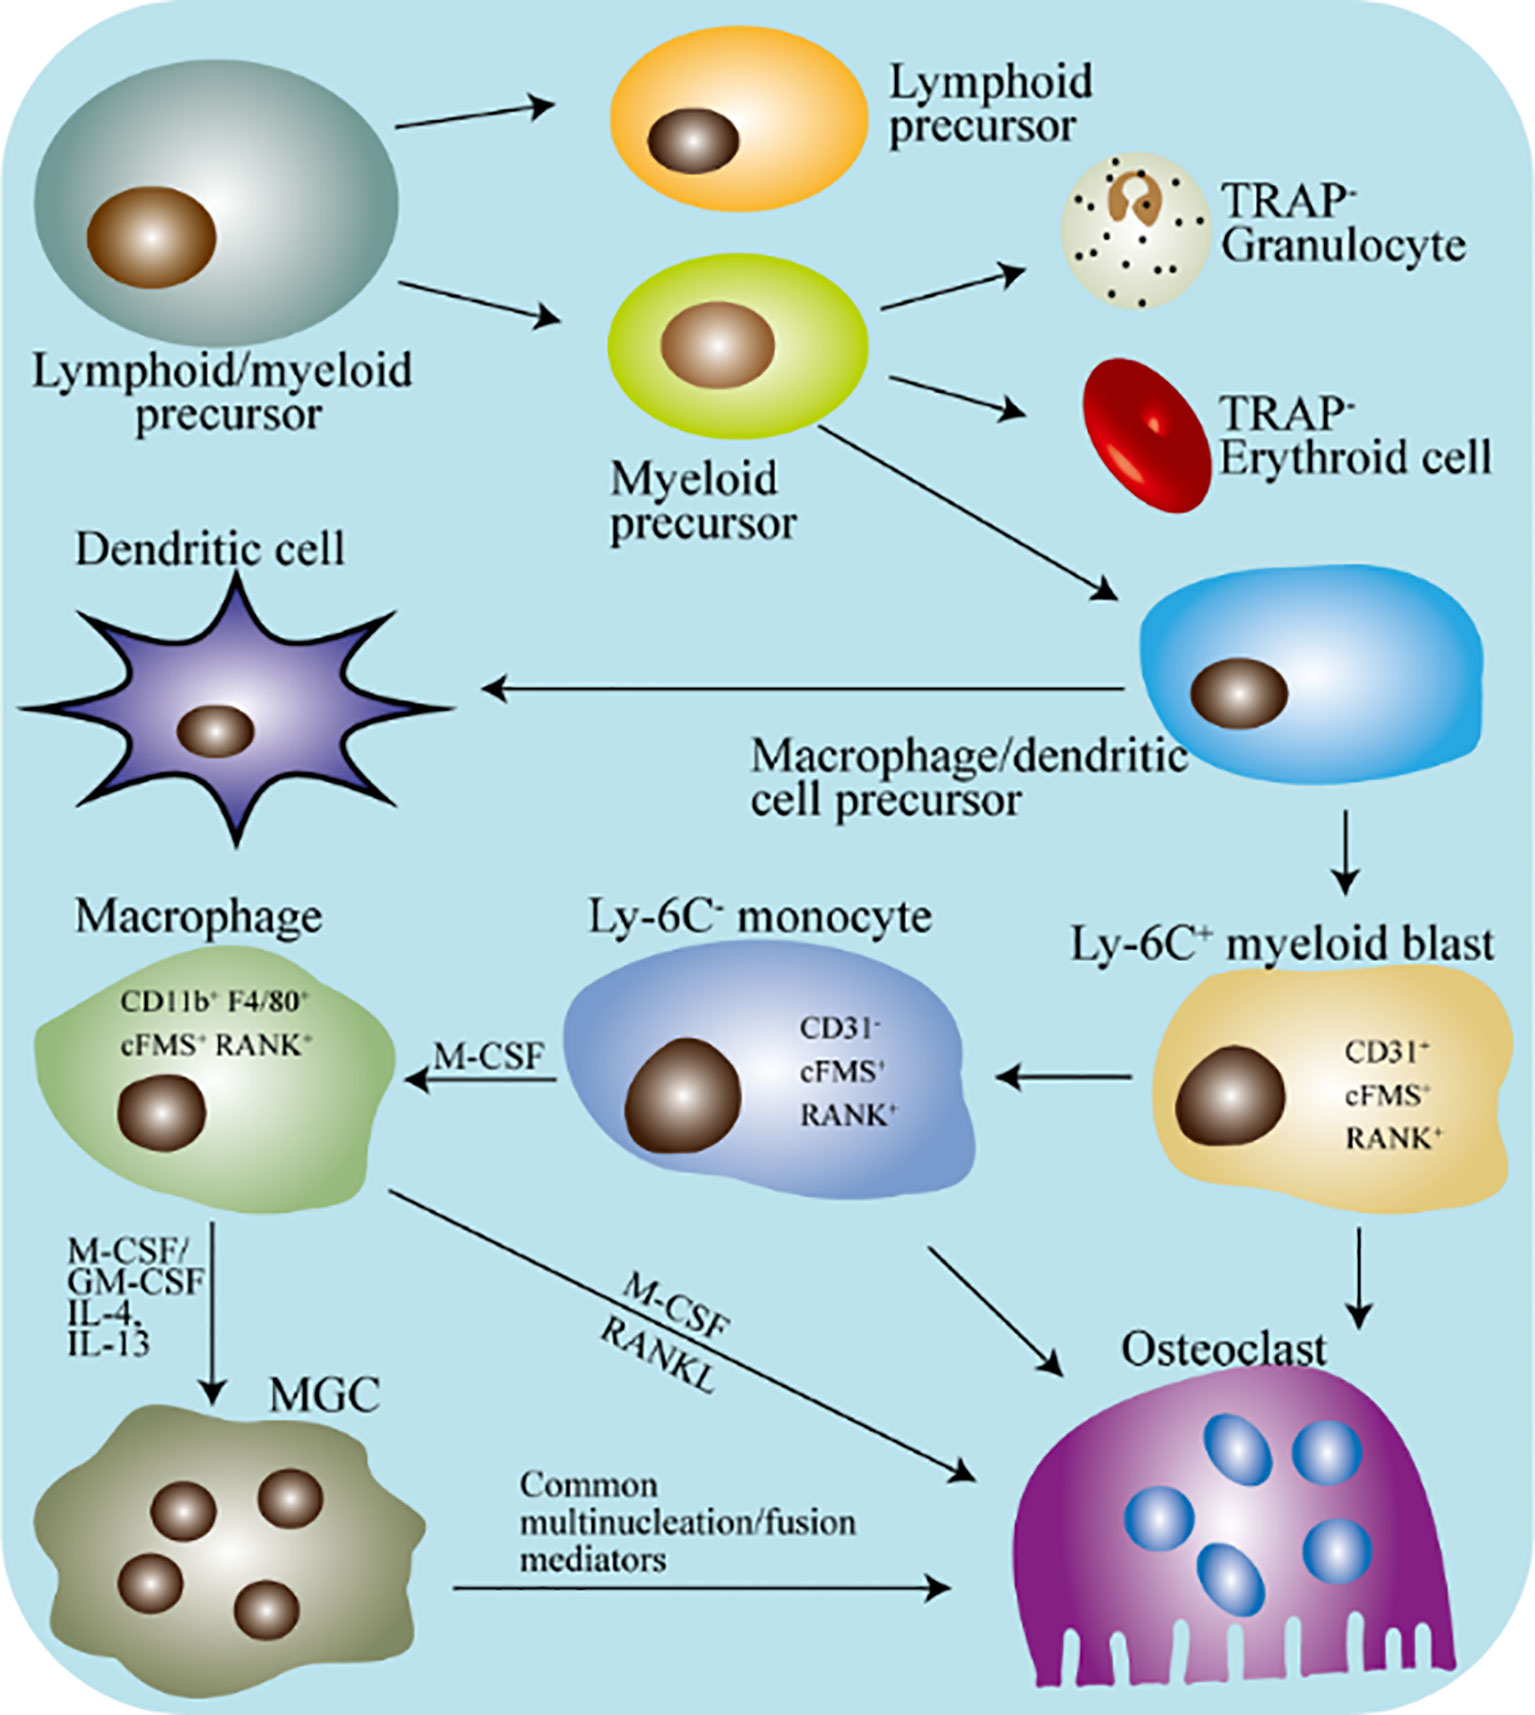 Monocyte progenitors give rise to multinucleated giant cells